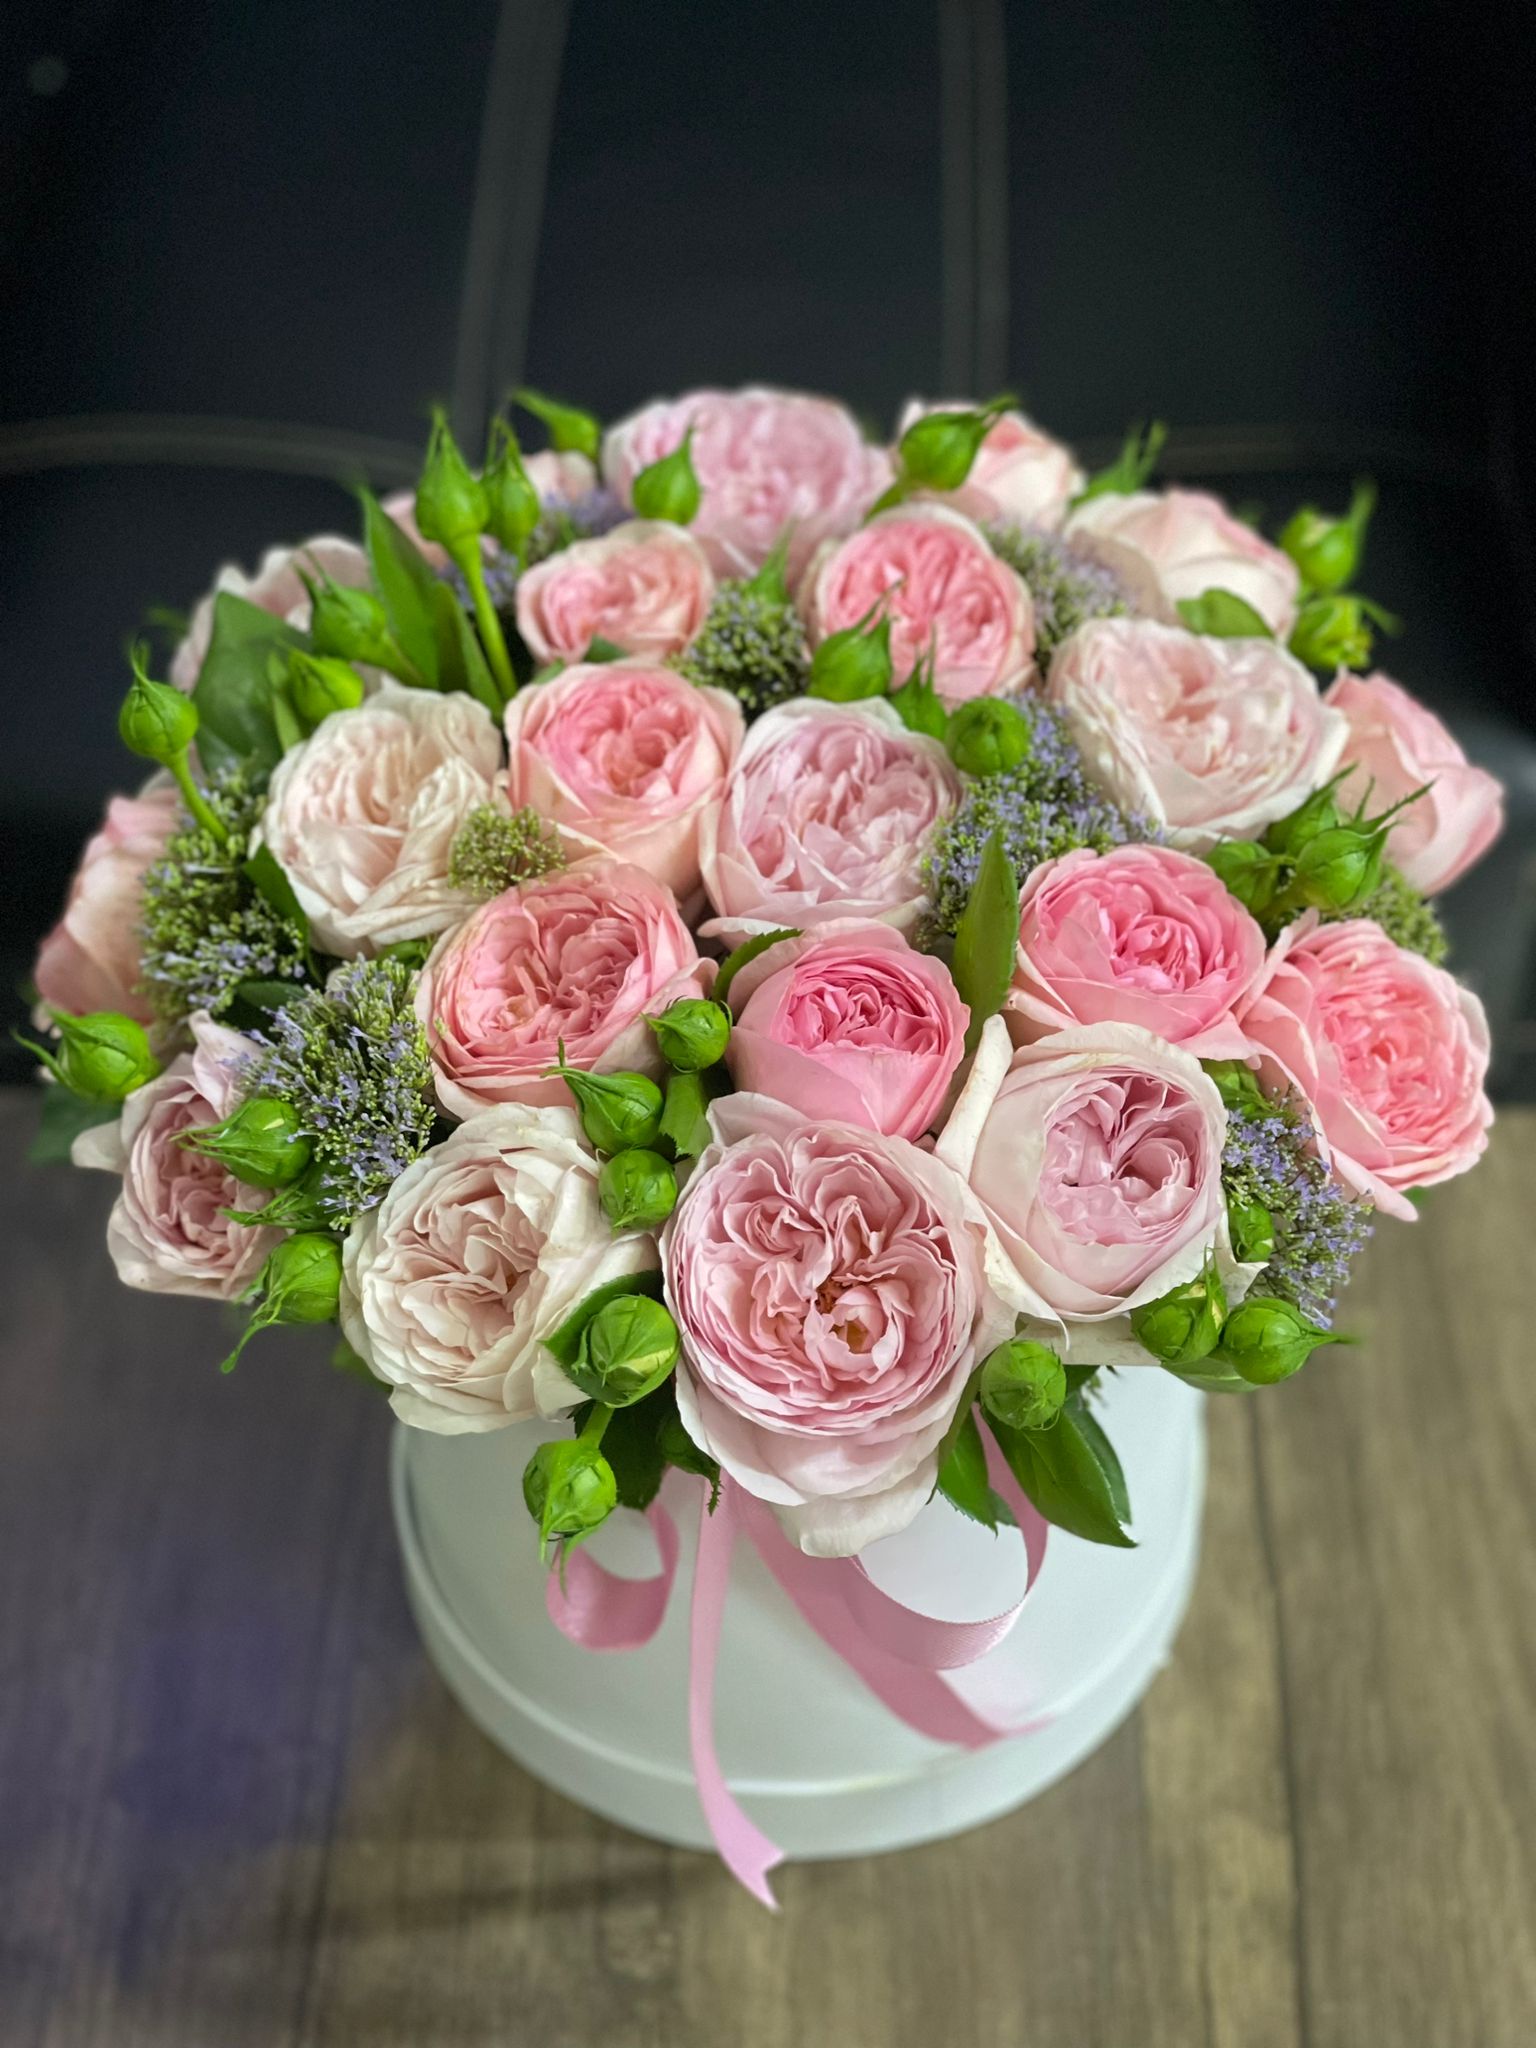  Kemer Flower Delivery 21 Pieces of Pion Roses in a White Box